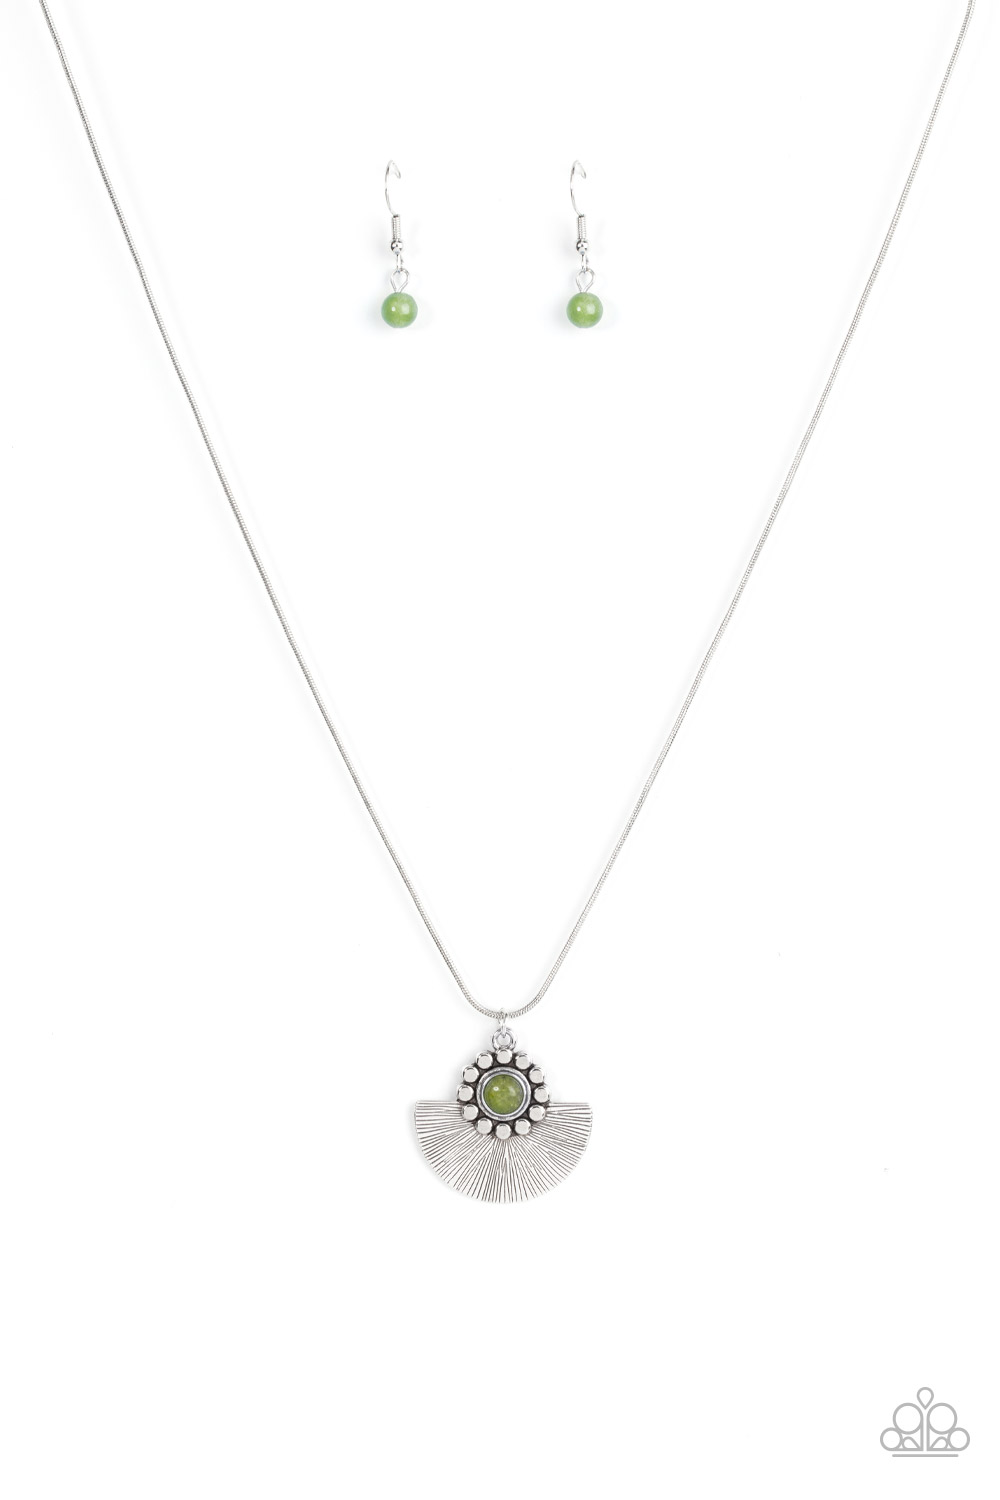 Necklace - Magnificent Manifestation - Green